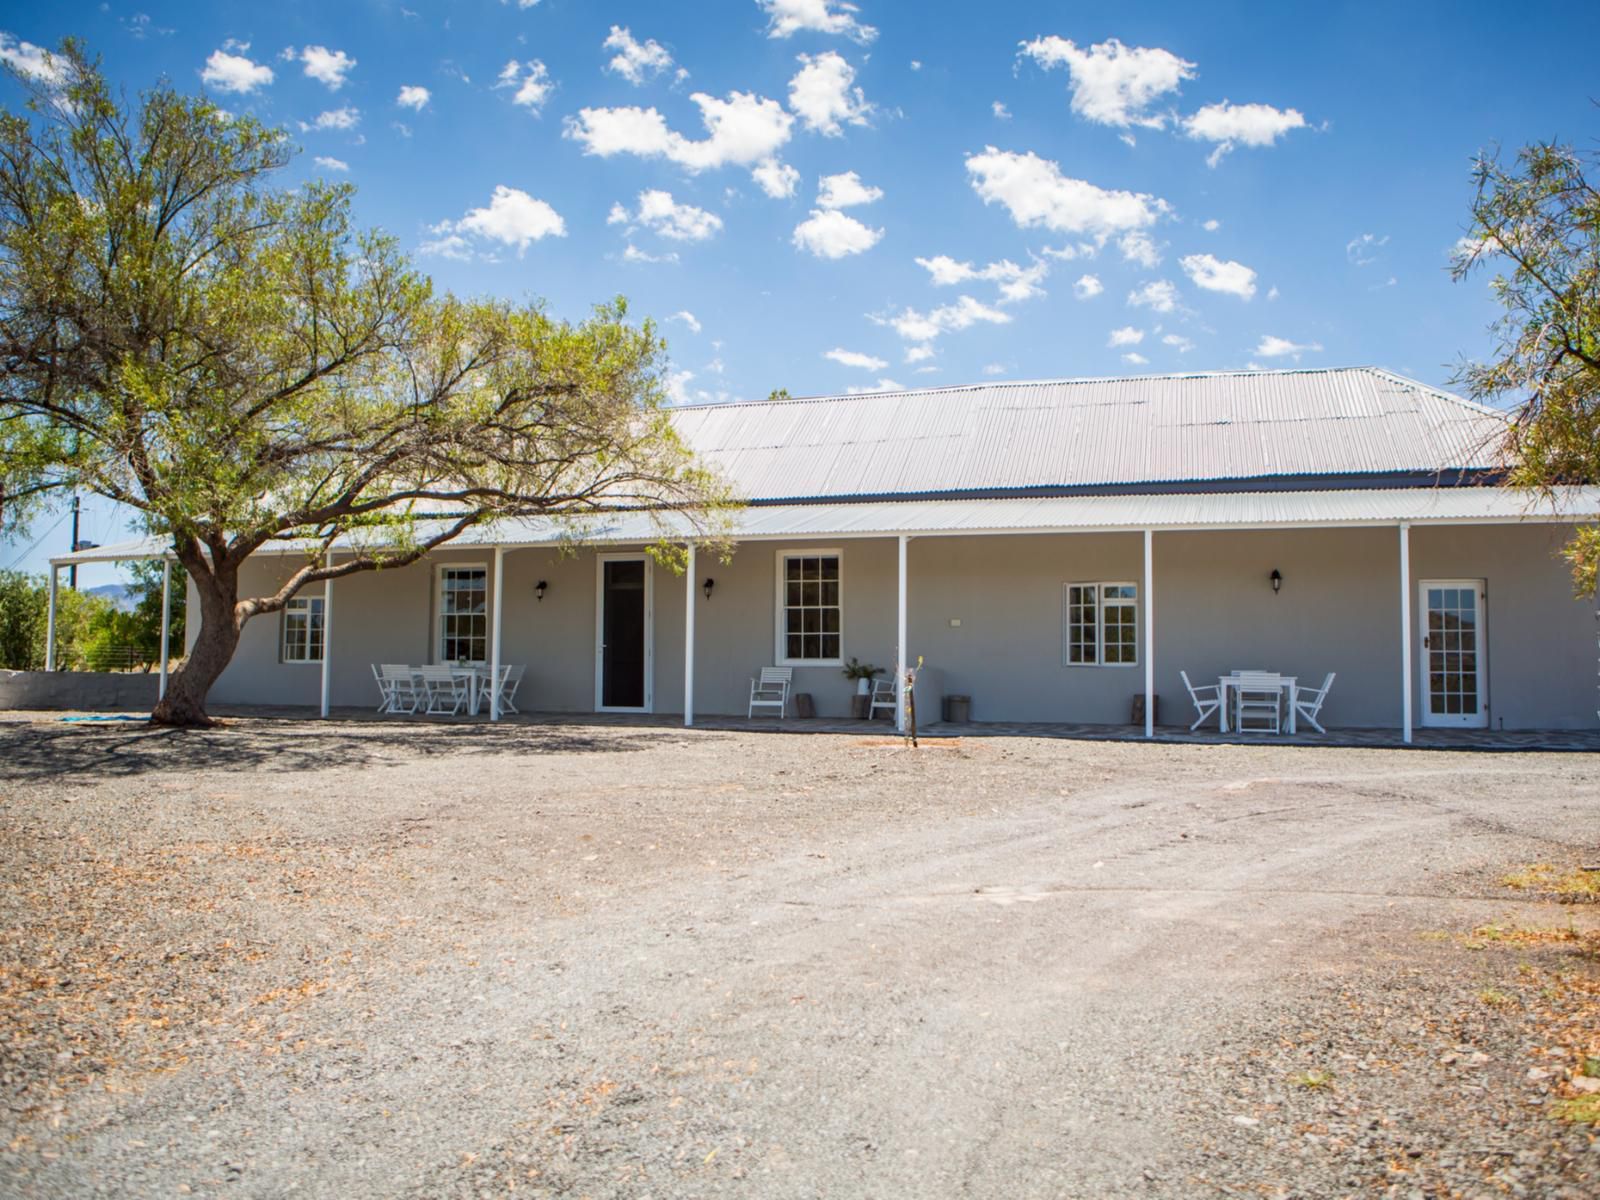 Grootfontein Farm House Karoo National Park Western Cape South Africa Barn, Building, Architecture, Agriculture, Wood, House